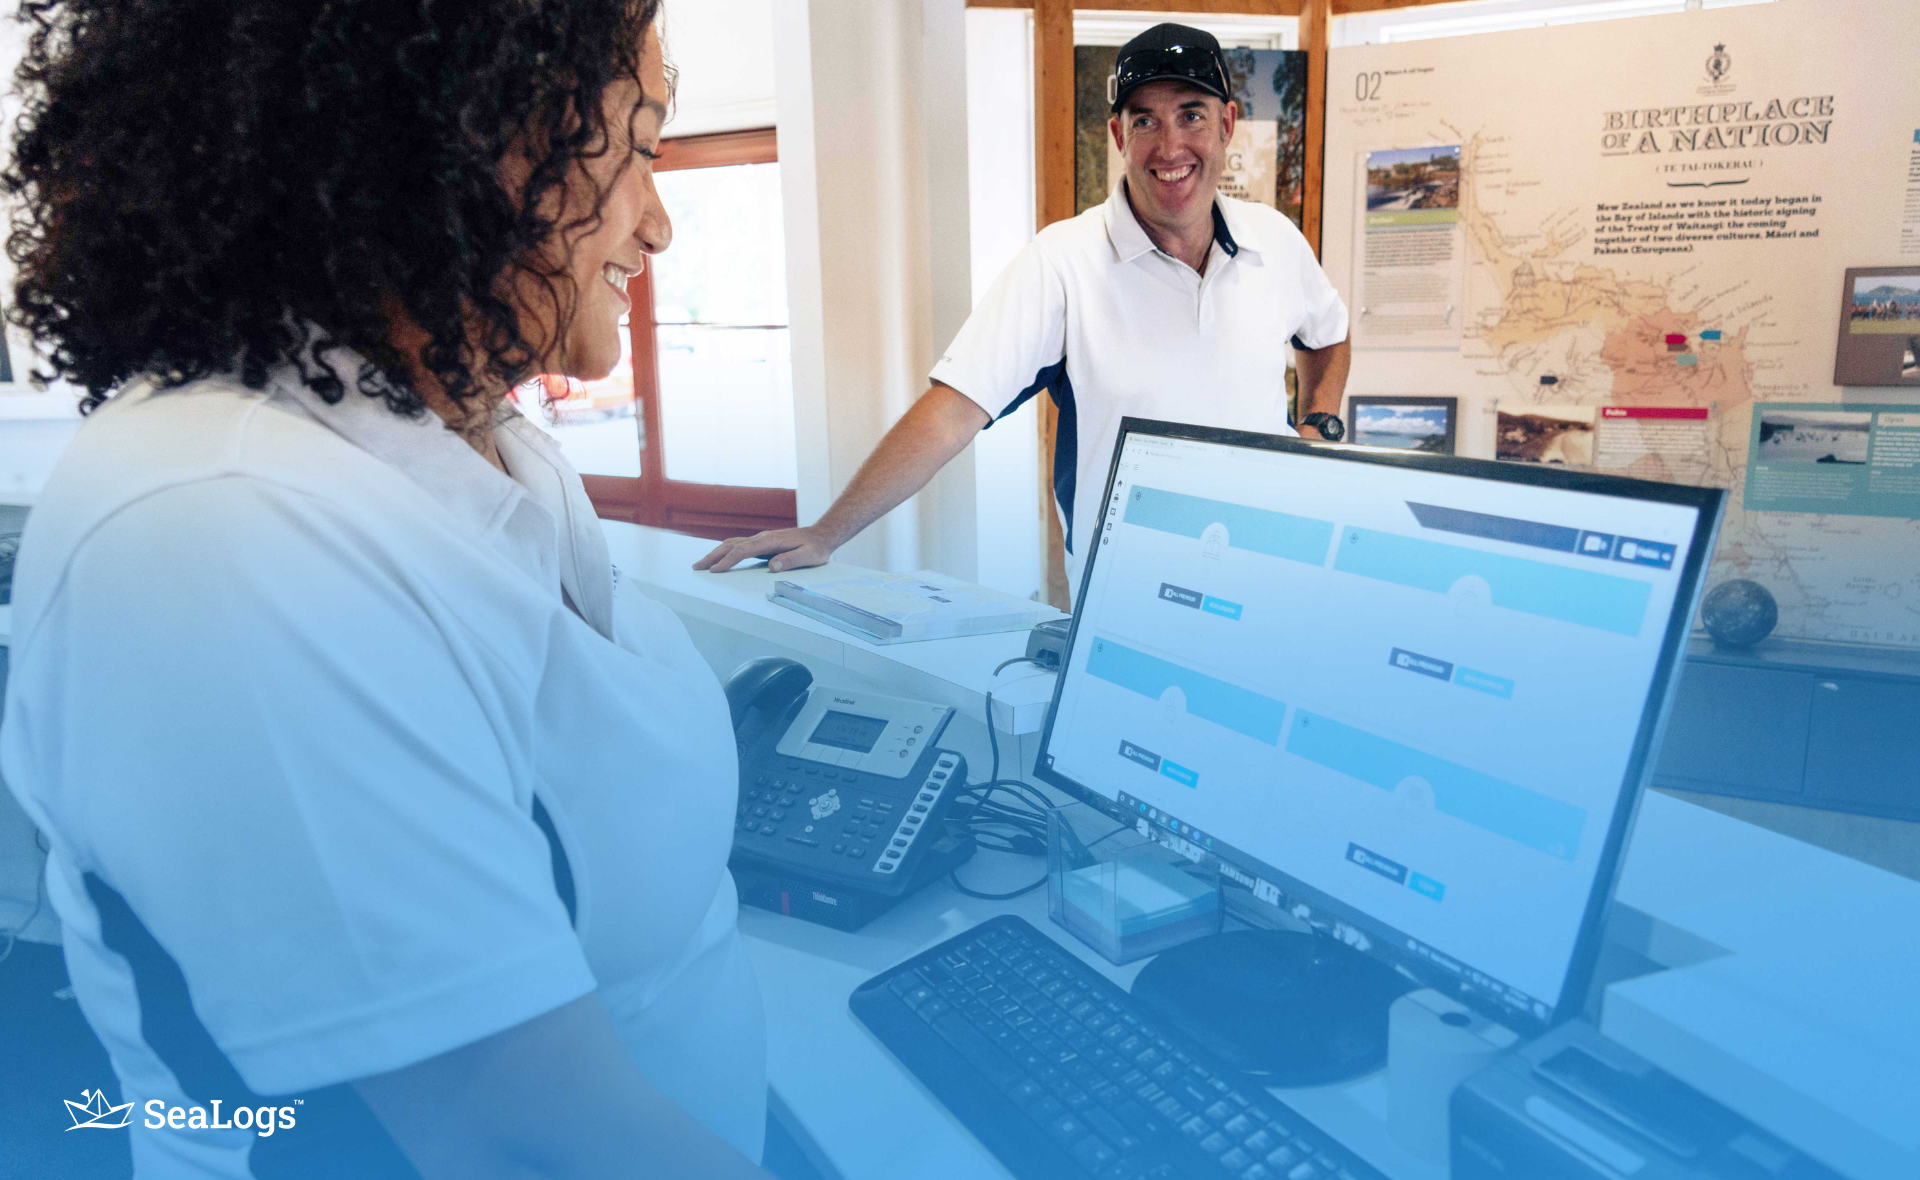 SeaLogs streamlines admin tasks ashore with real-time fleet updates, automated reporting, and efficient data management, enhancing decision-making and operational oversight.